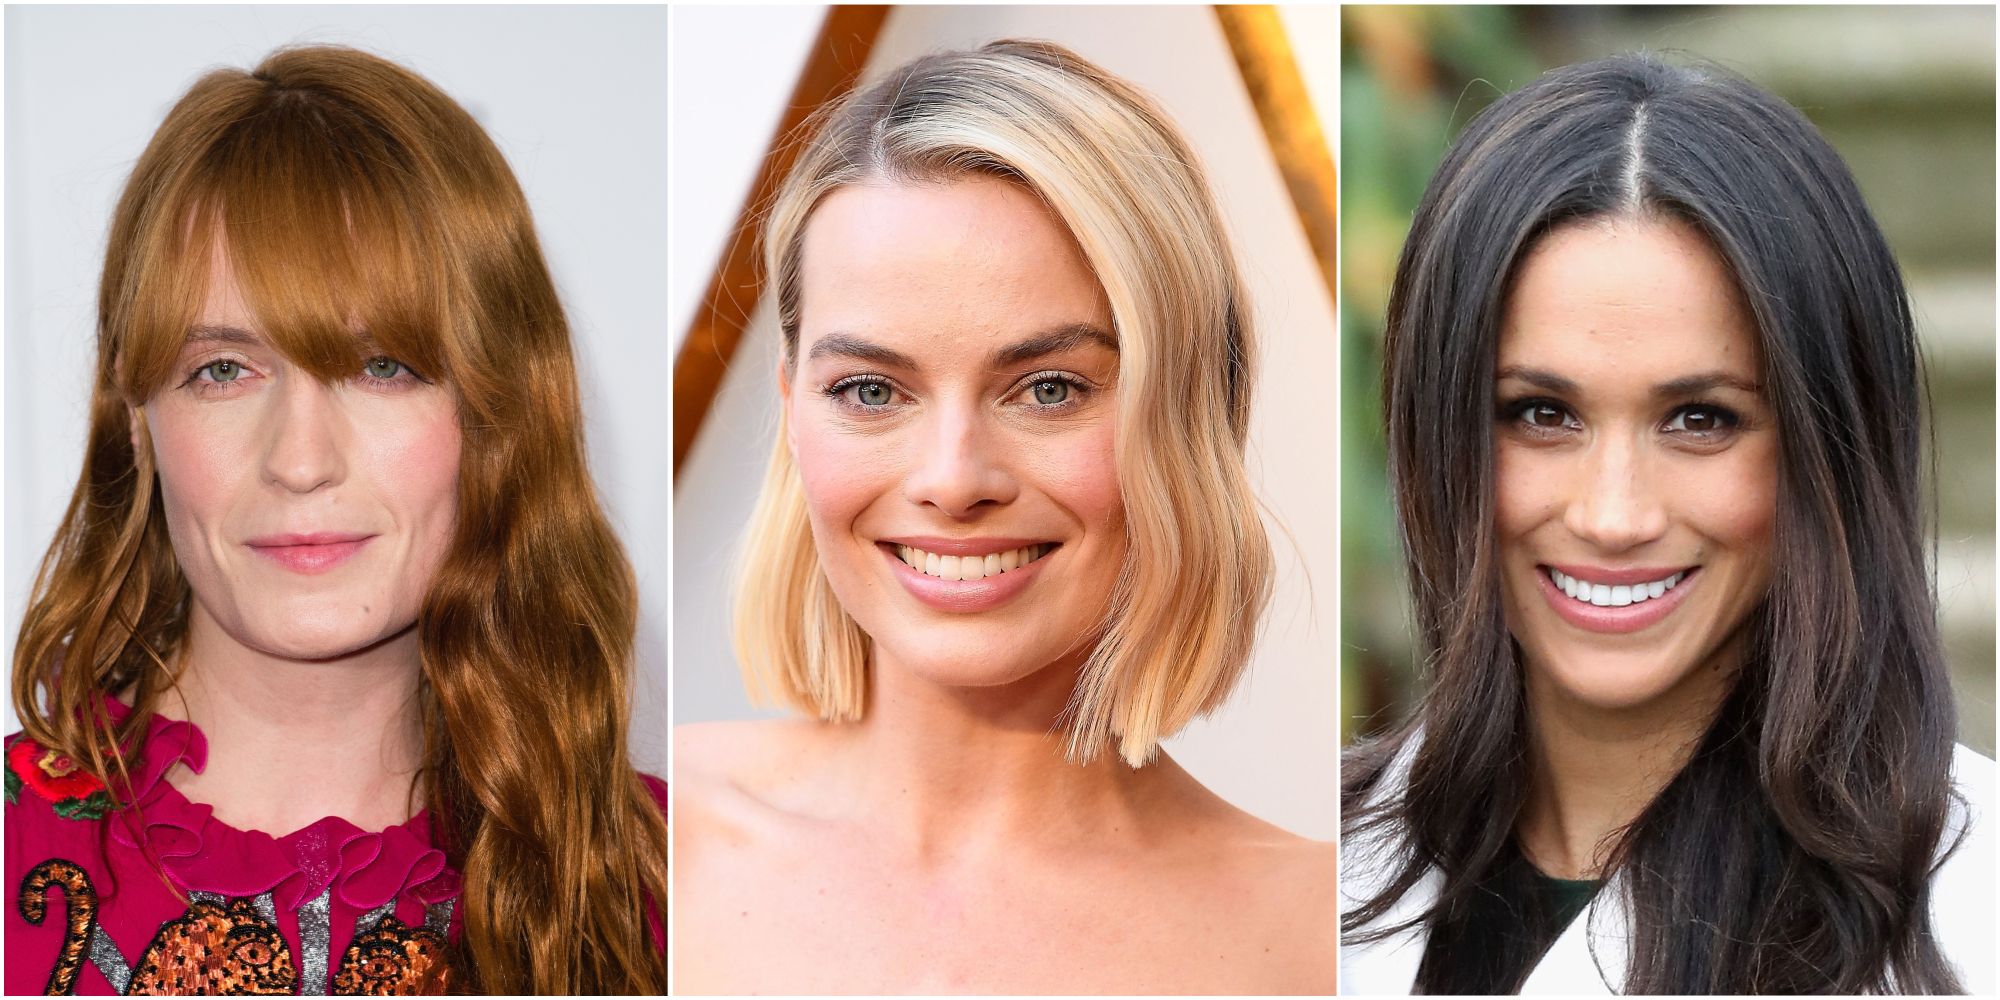 This Is Why You Have Red, Brown Or Blonde Hair, According To New Study